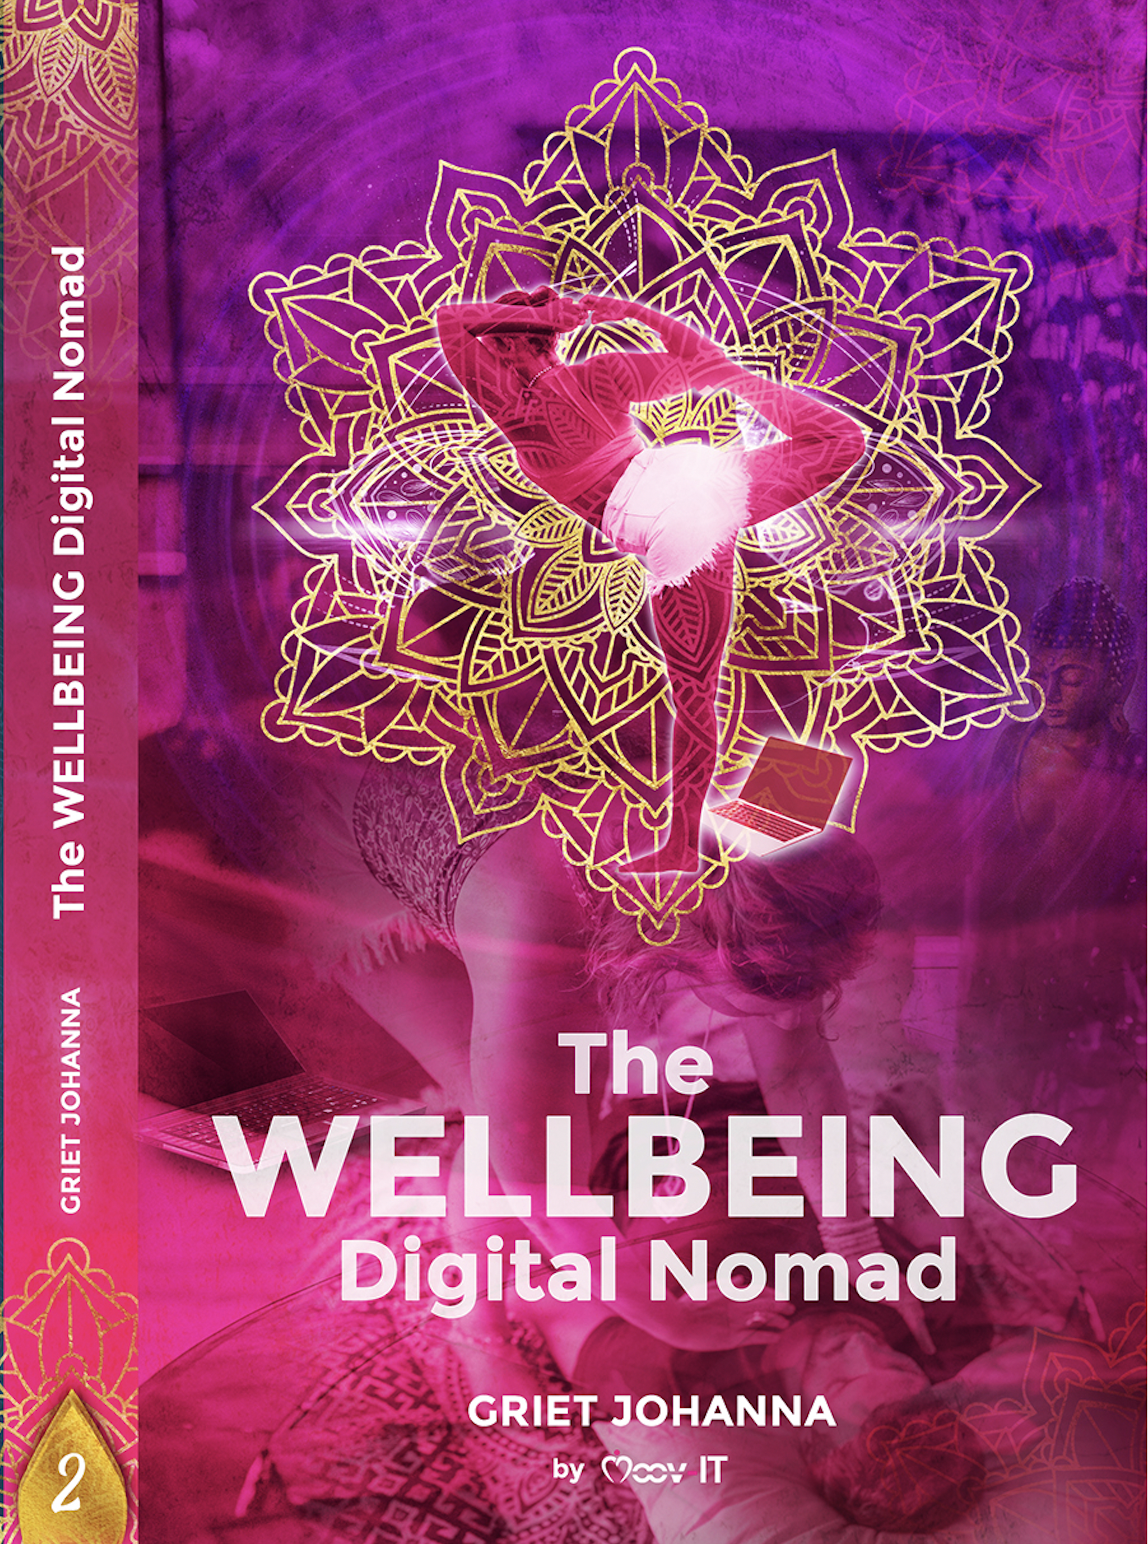 The Wellbeing Digital Nomad